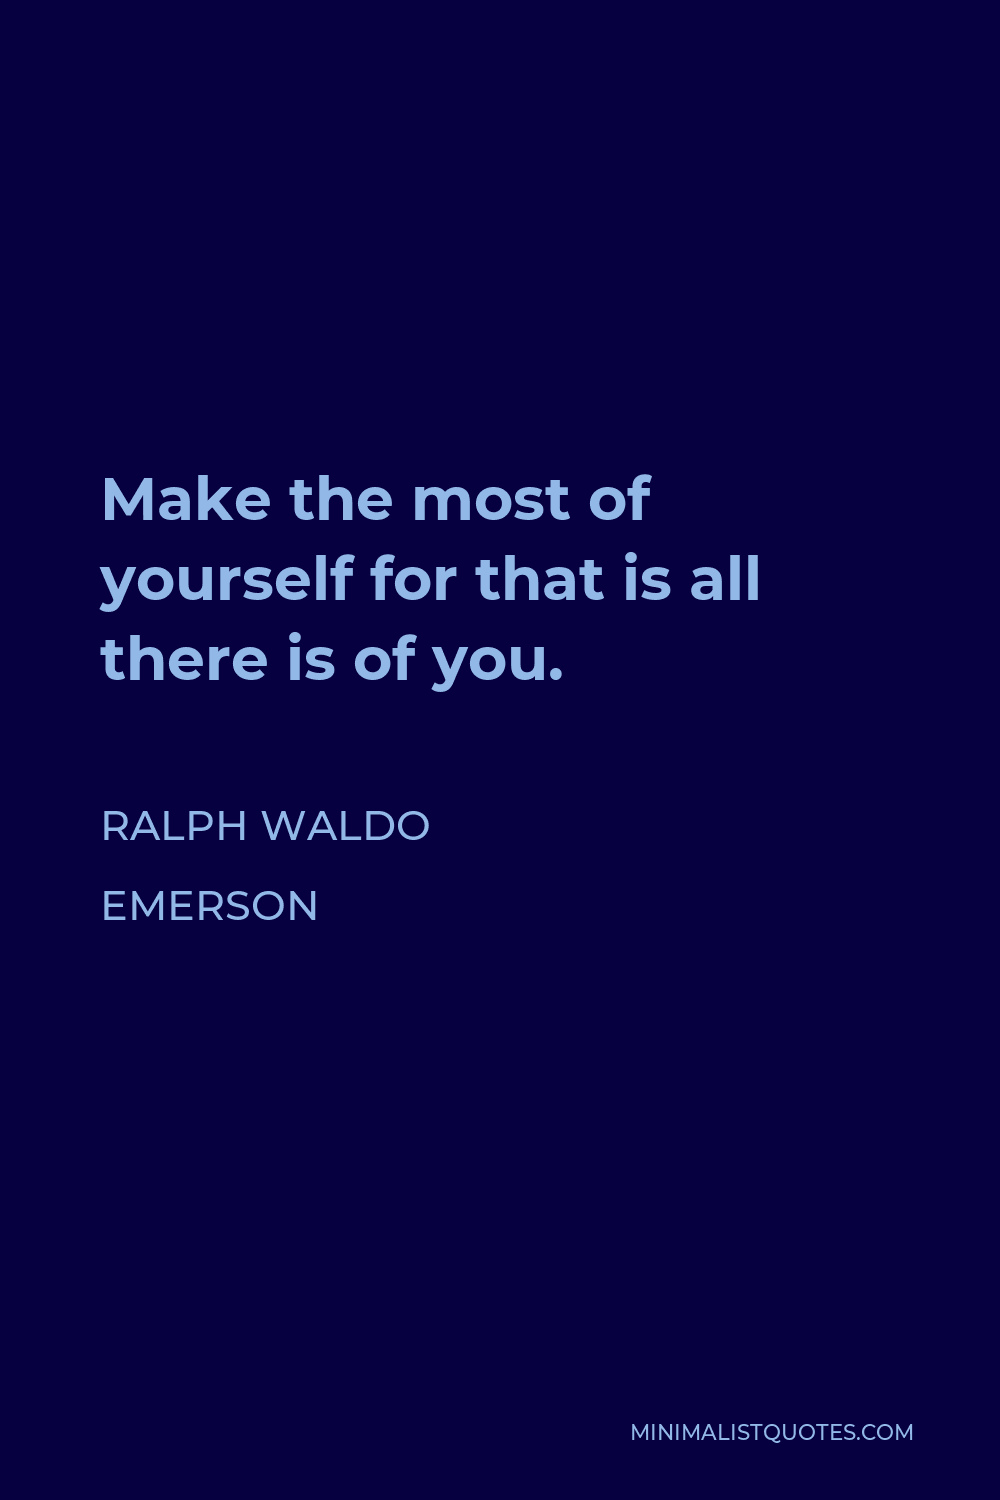 Ralph Waldo Emerson Quote - Make the most of yourself for that is all there is of you.